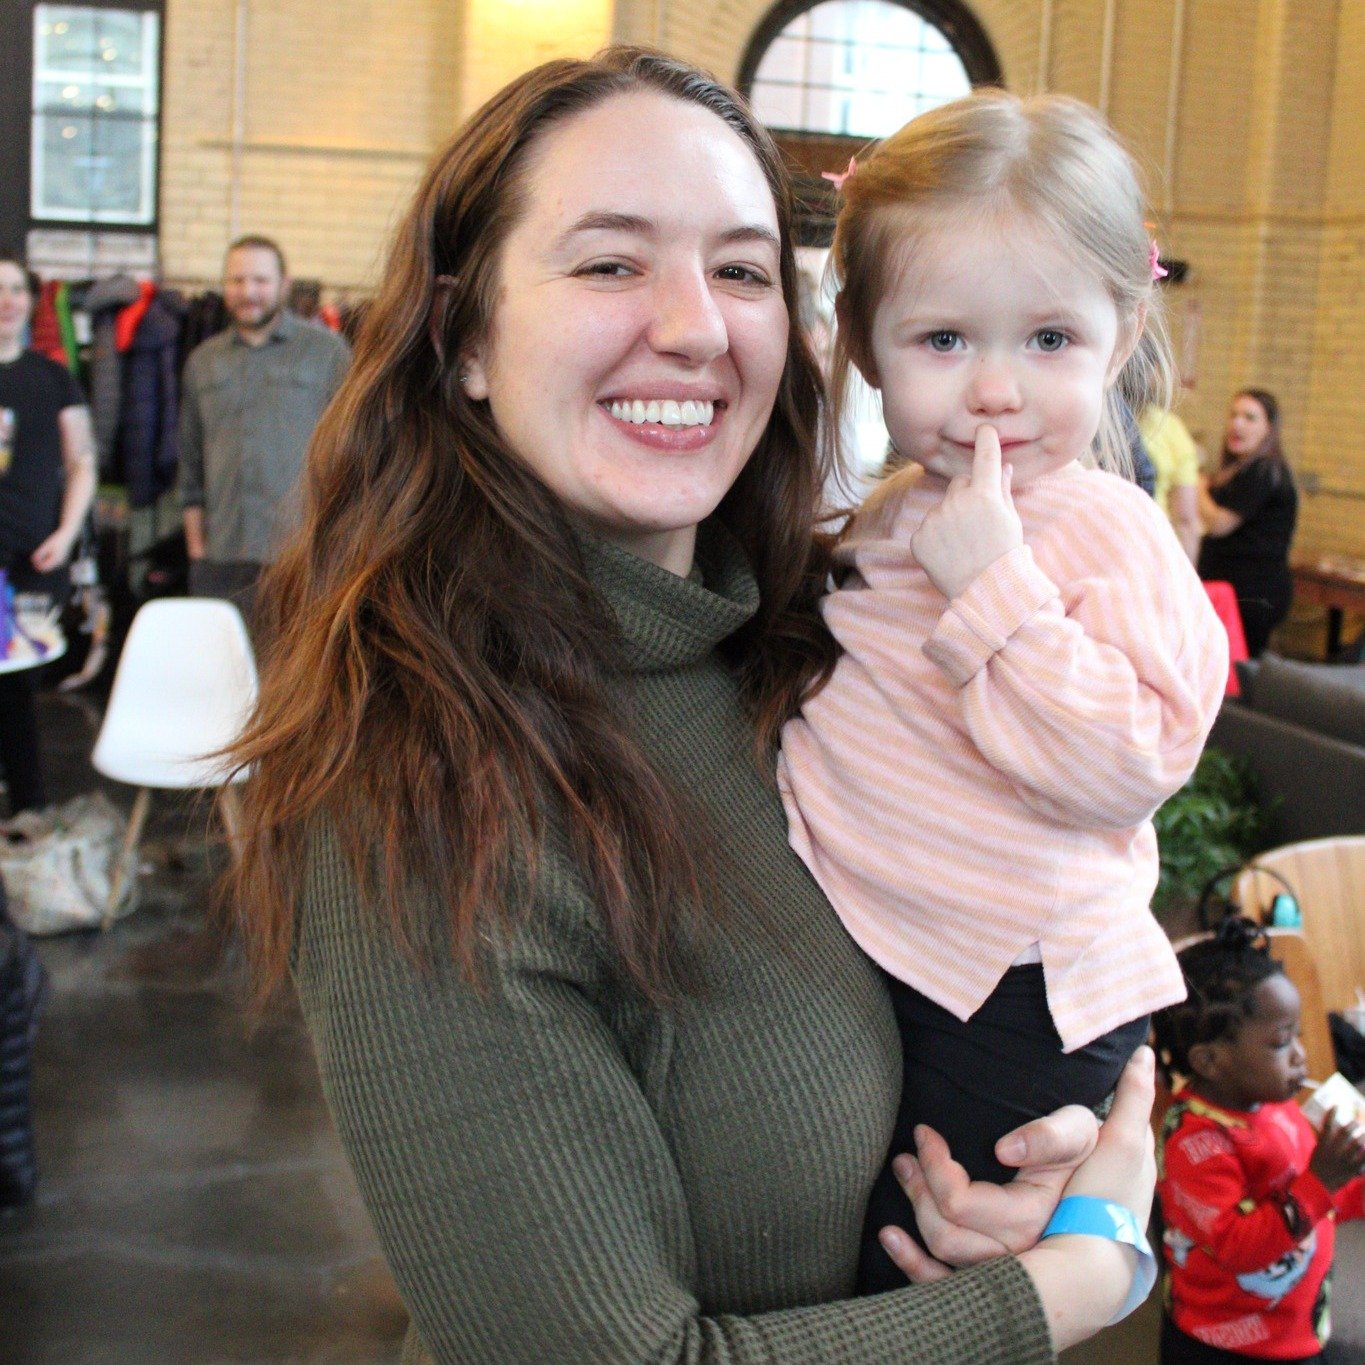 We are honoring and celebrating Mothers this week. Plan ahead by knowing what to do in Roslindale/Boston this week:
&bull;⁠ ⁠Mon 5/6: Trivia with Ticco and Matt @squarerootrozzie 
&bull;⁠ ⁠Tue 5/7: Mayor Wu&rsquo;s Coffee Hour Series will be at Mozar